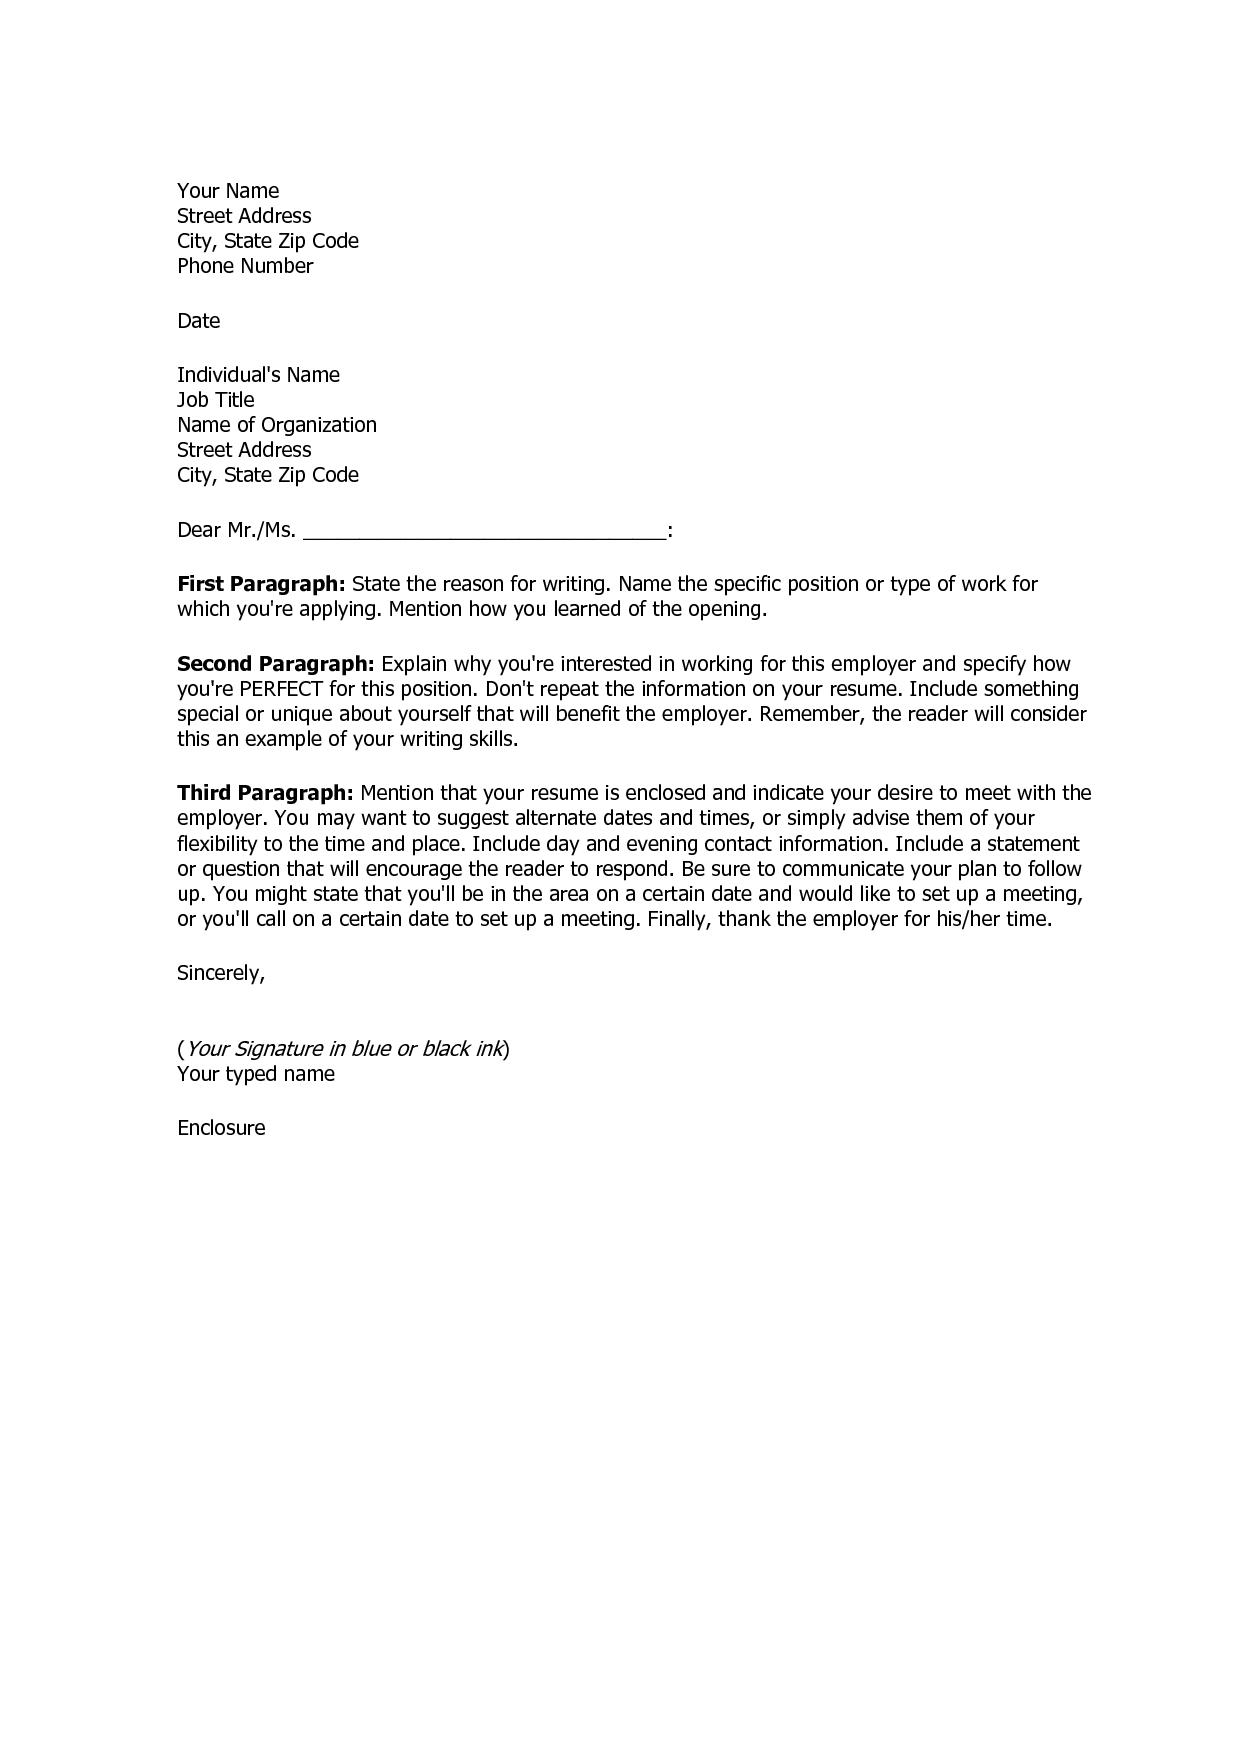 resume cover letter example